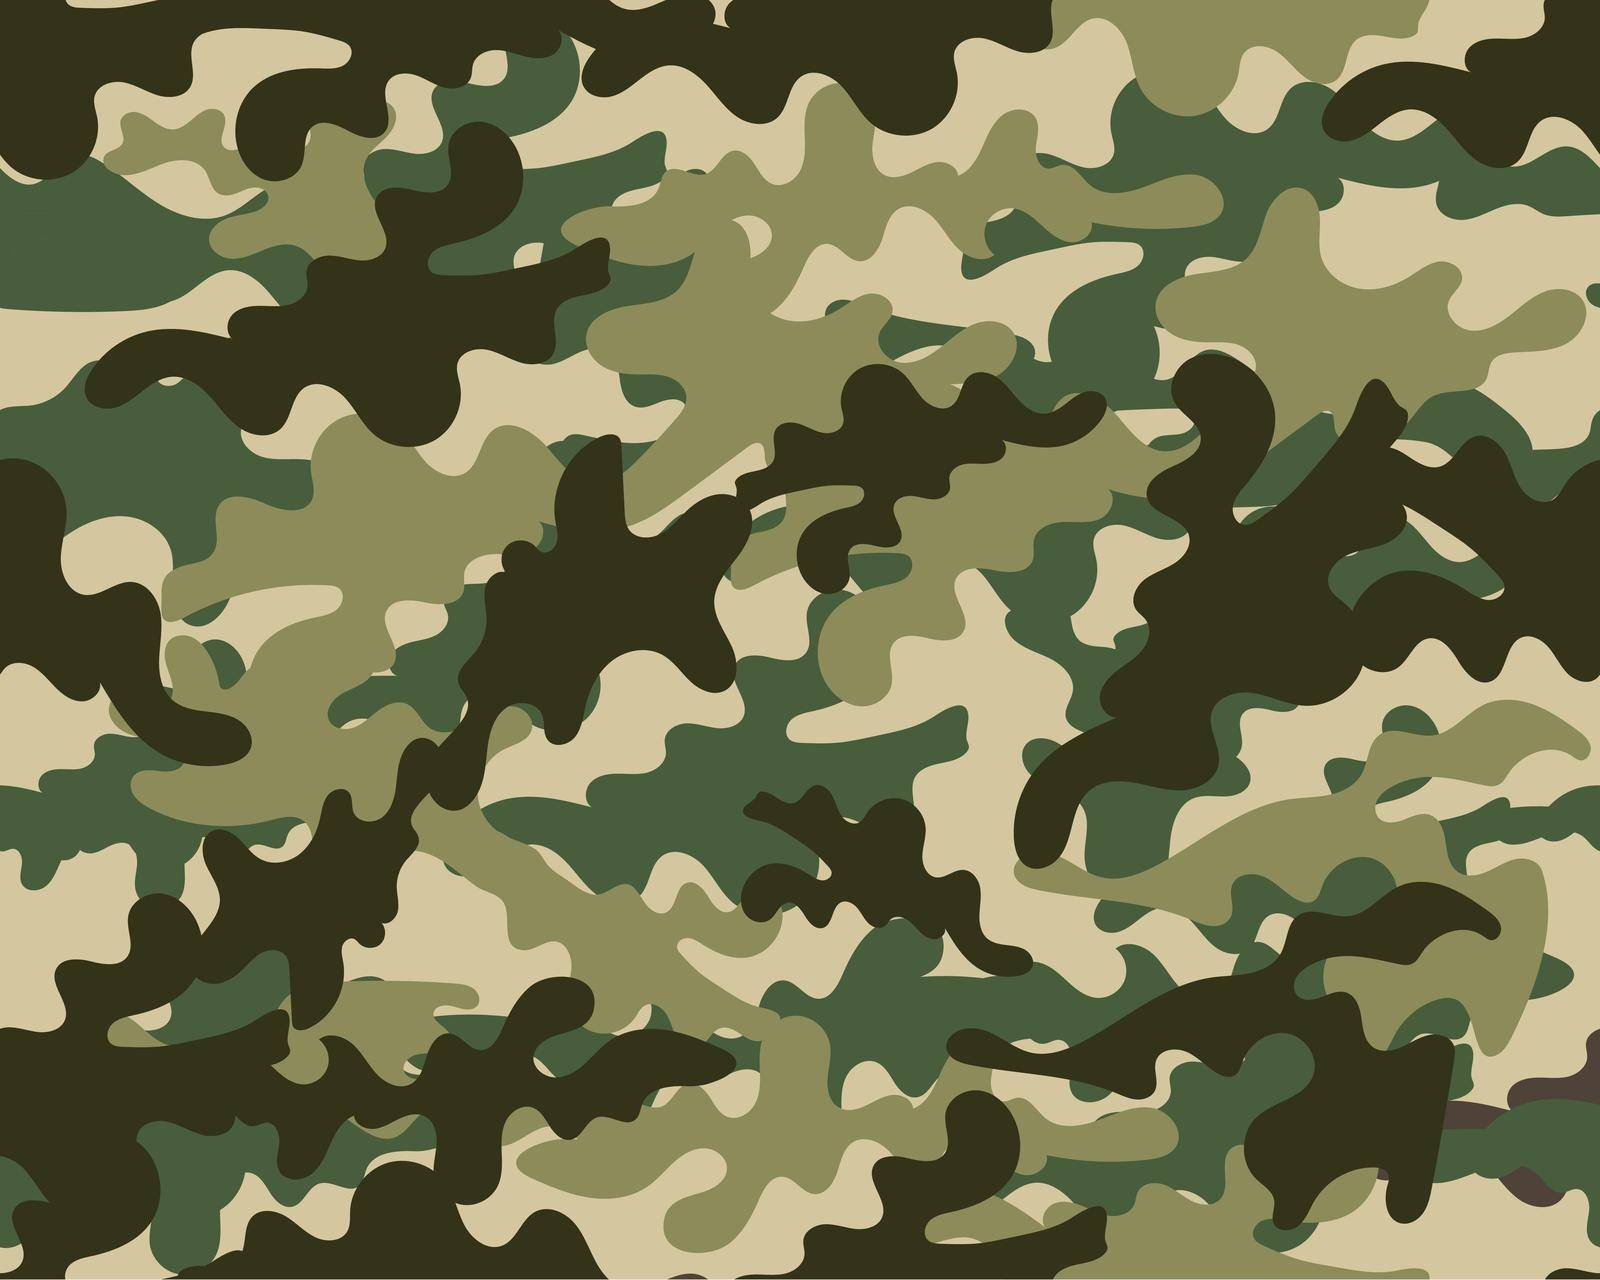 Texture military seamless army illustration by Elaelo